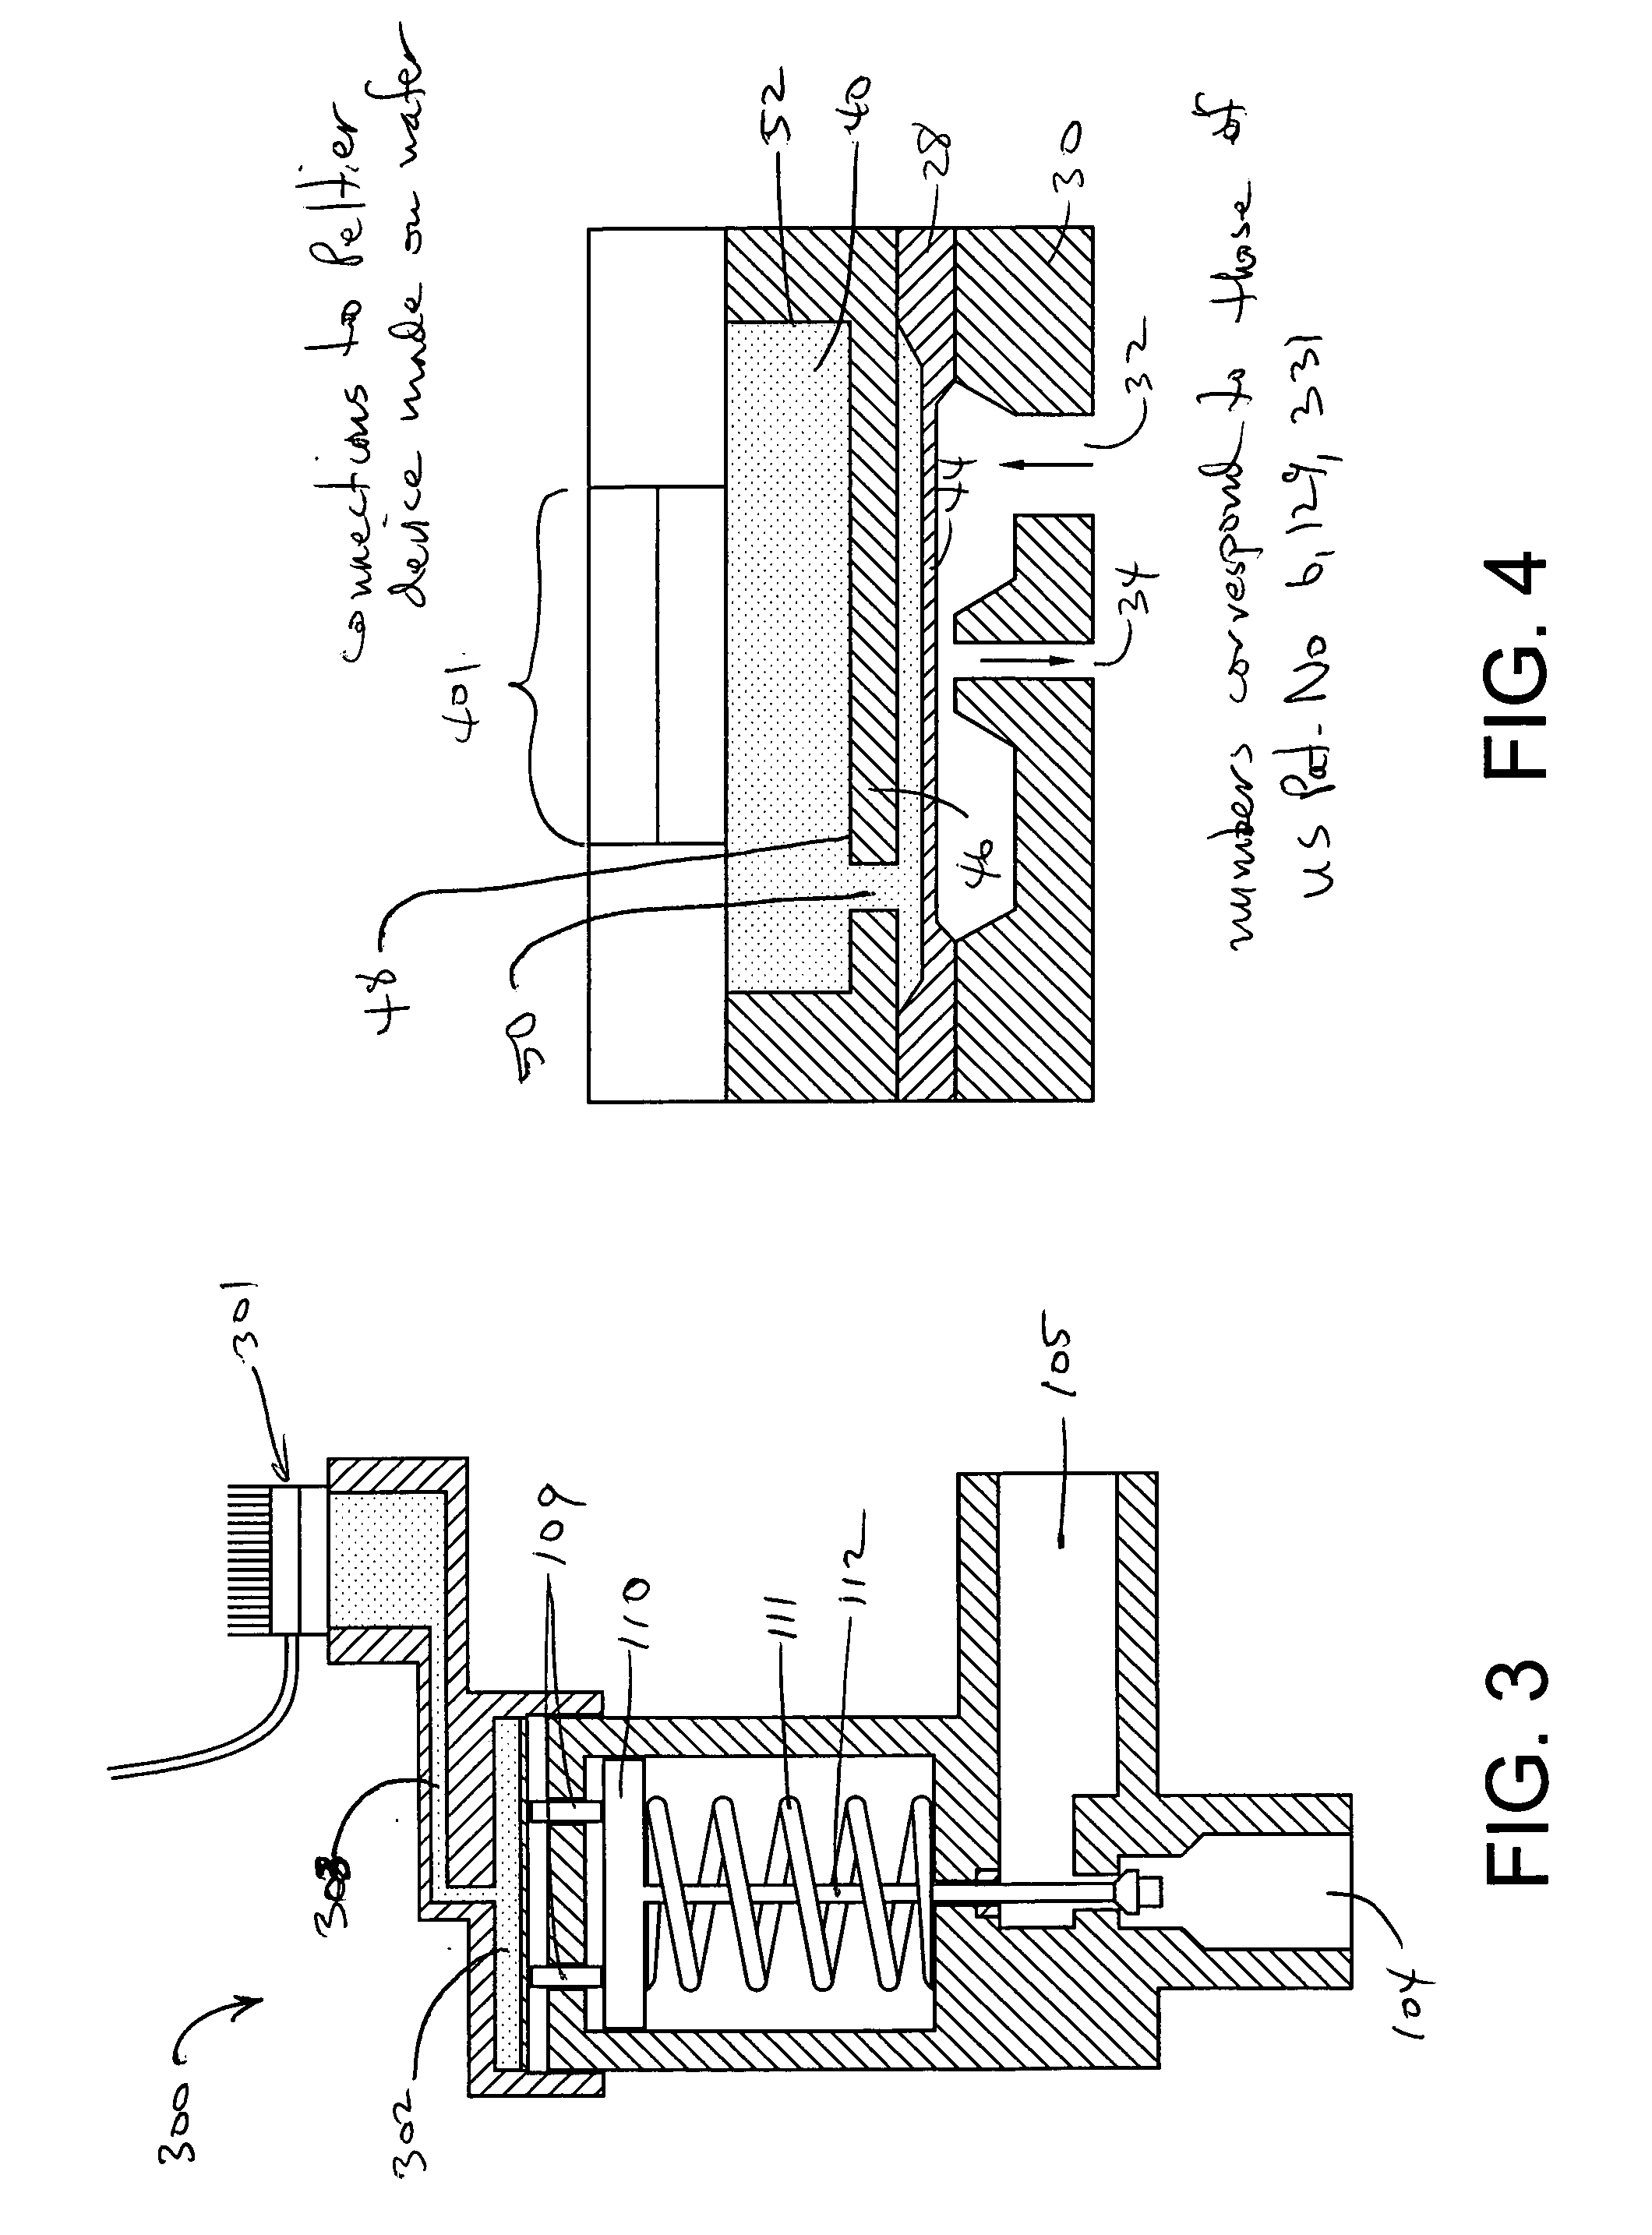 Valves having a thermostatic actuator controlled by a peltier device